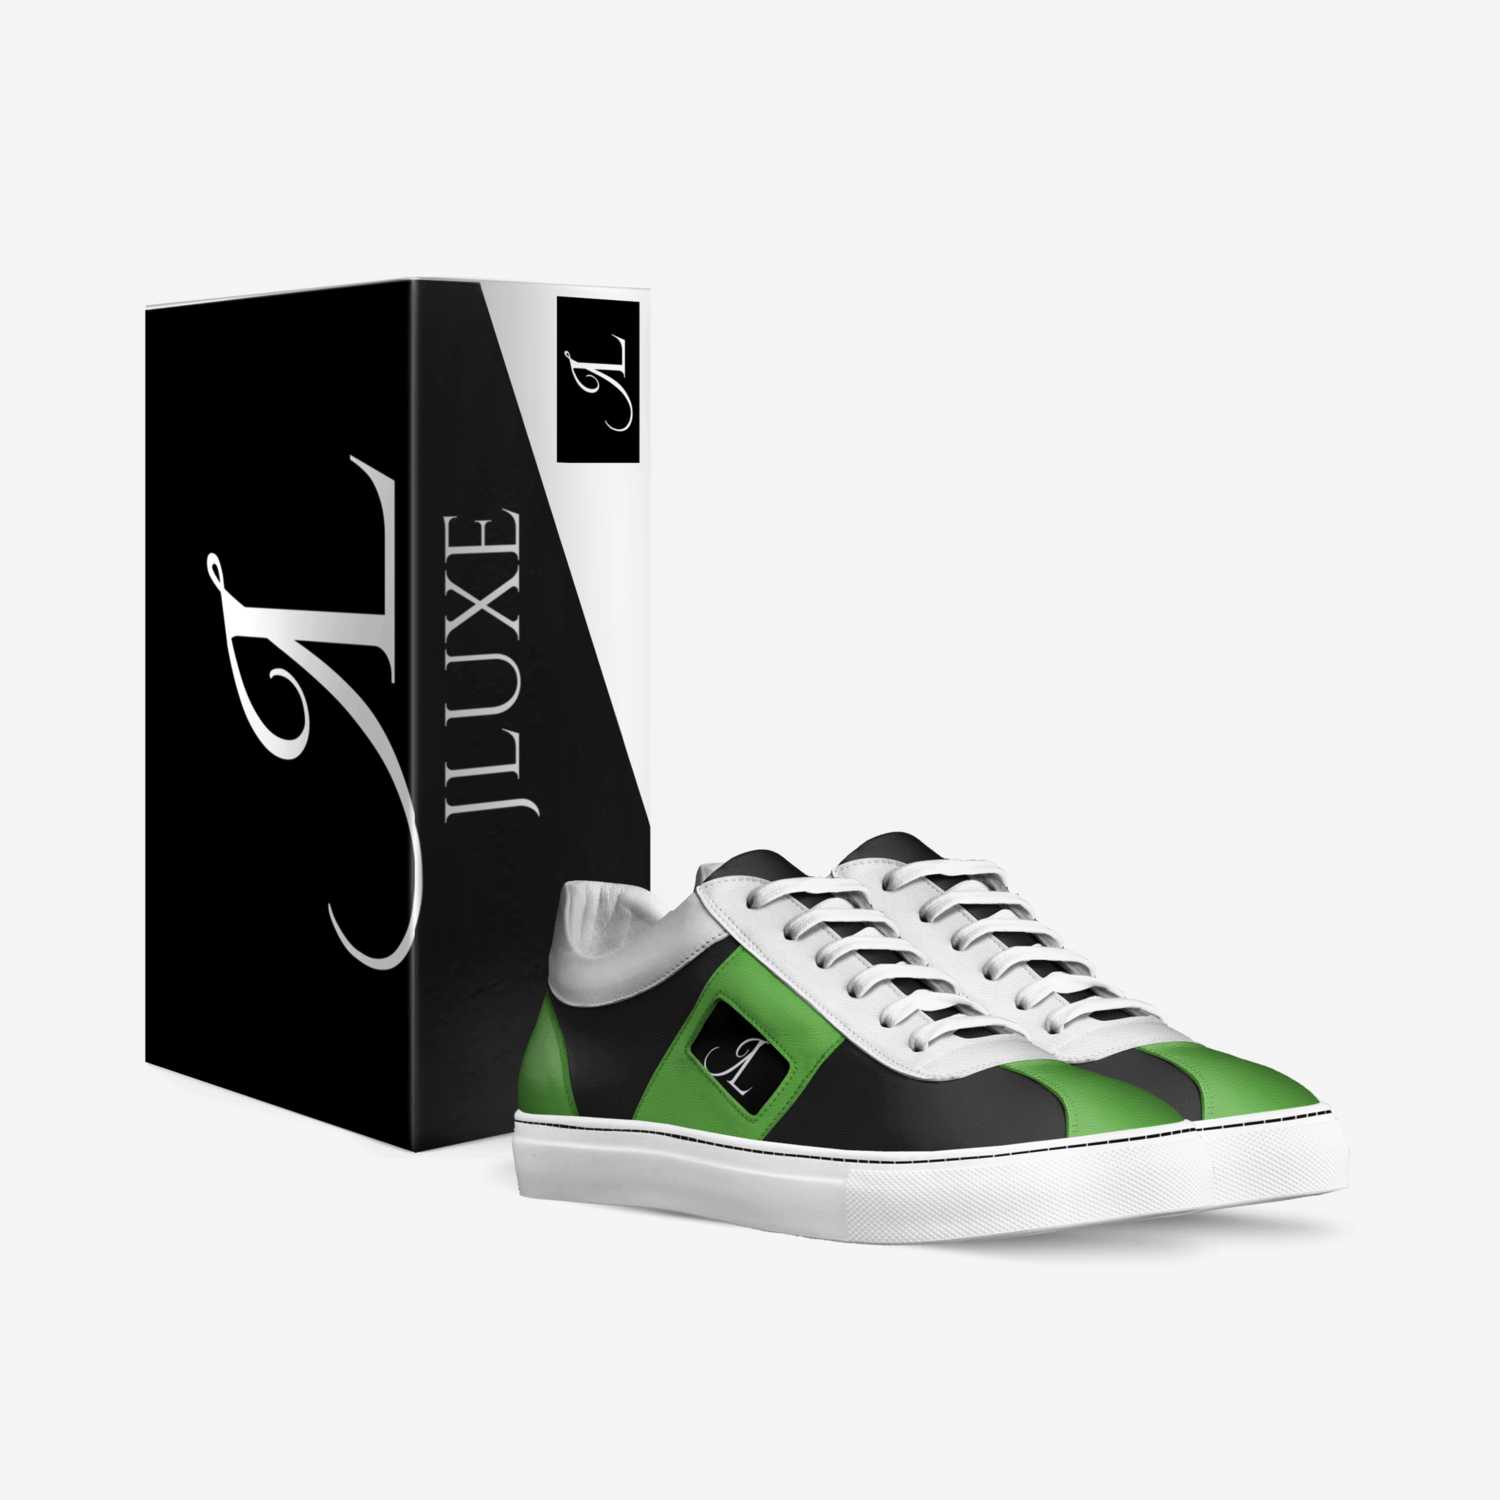 JLUXE1 custom made in Italy shoes by James Luckes | Box view